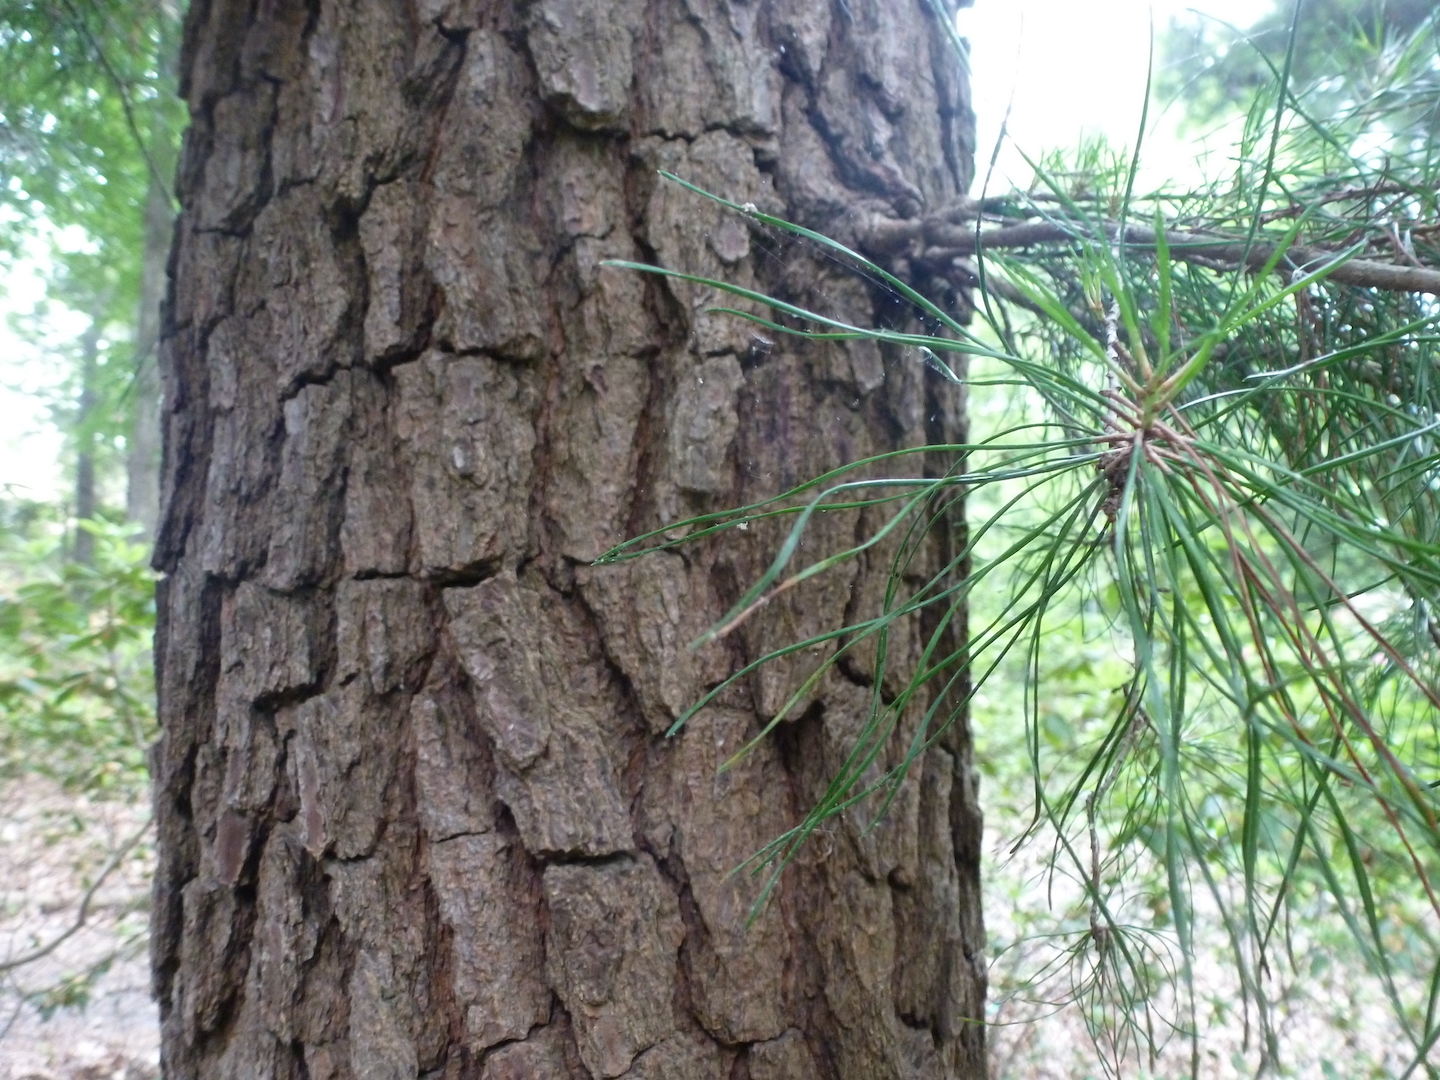 The Scientific Name is Pinus glabra. You will likely hear them called Spruce Pine, Walter's Pine. This picture shows the Note the tight bark unlike other pines. of Pinus glabra